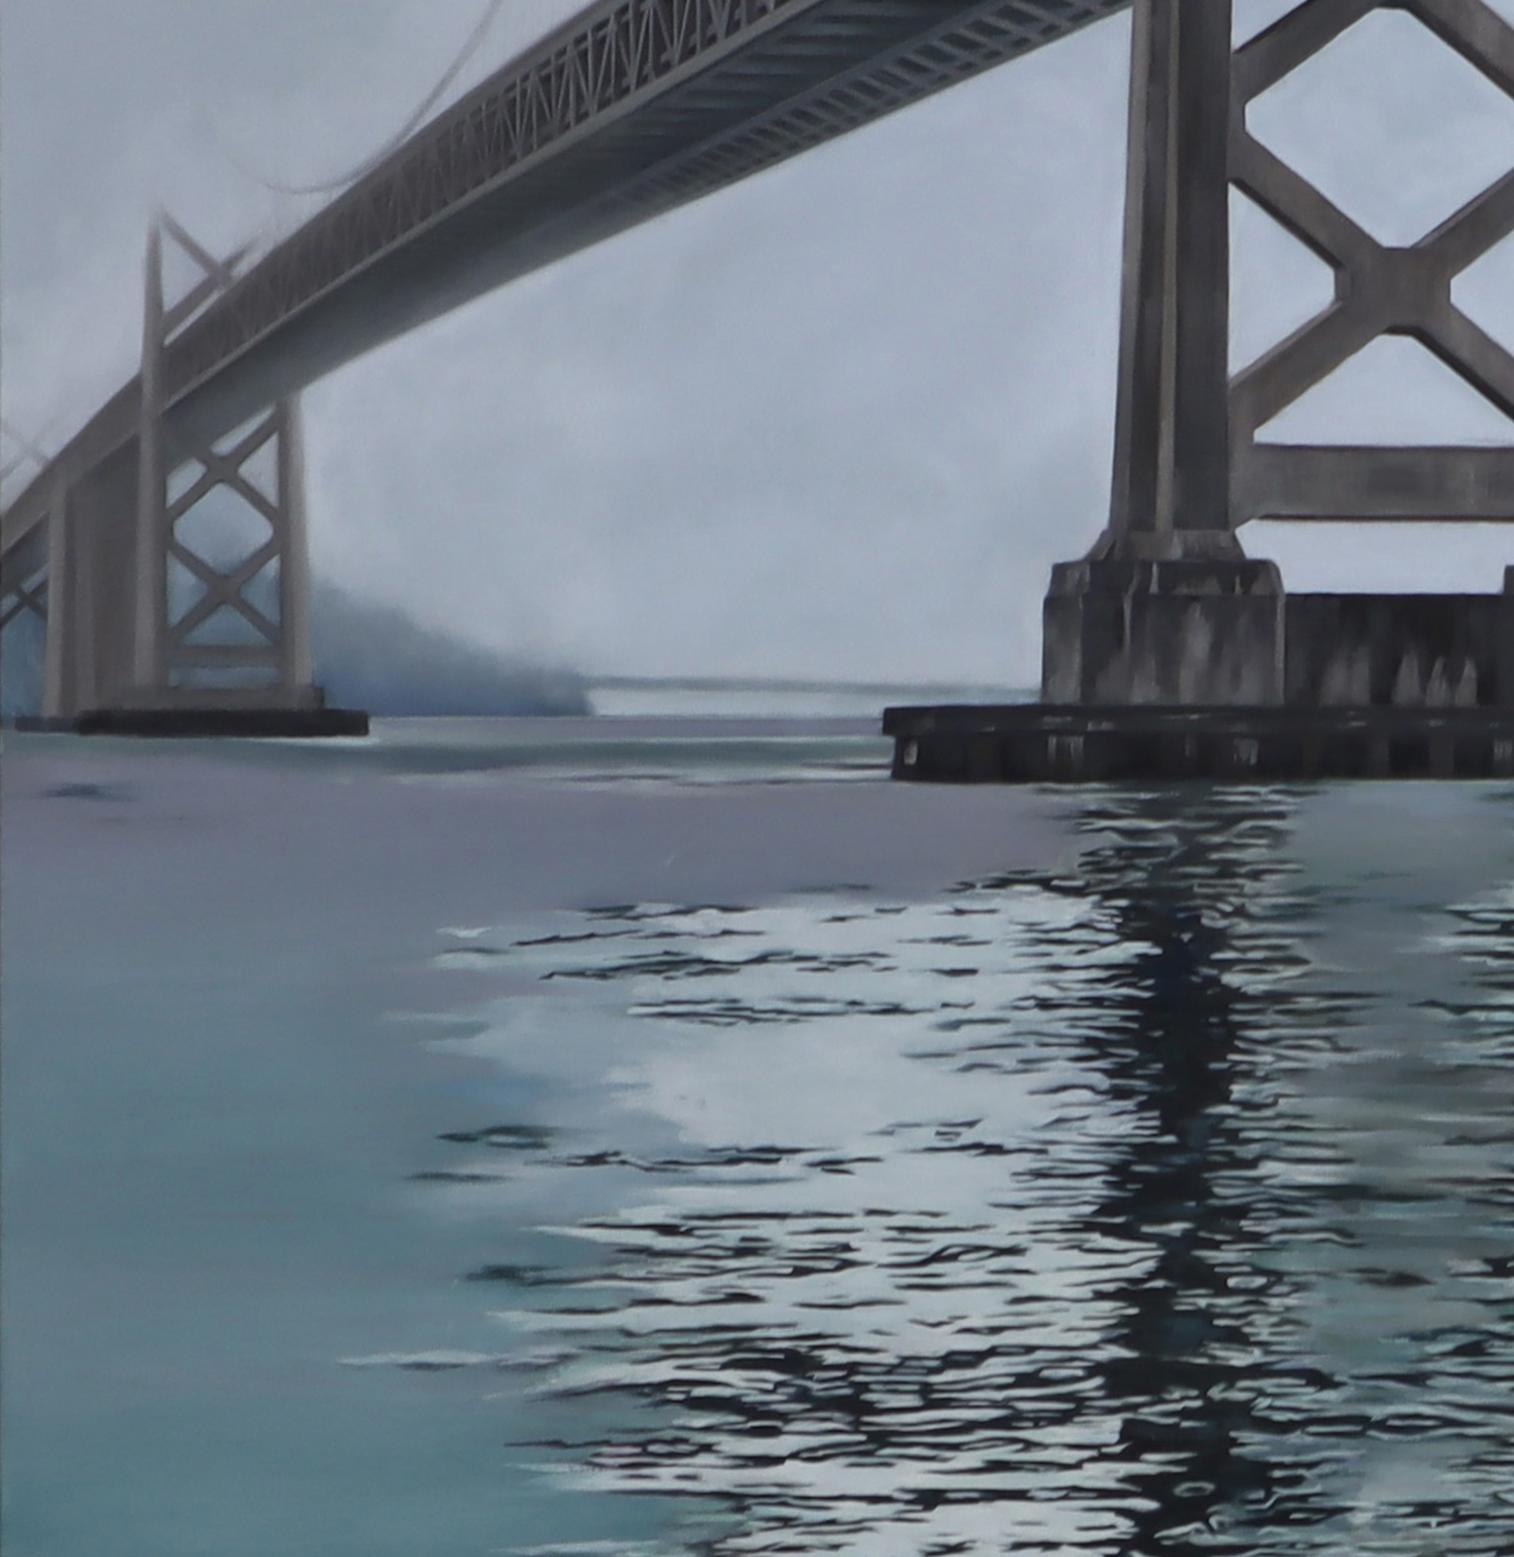 BAY BRIDGE - Contemporary Realism / San Francisco / Light and Shadow - Gray Landscape Painting by Sunghee Jang